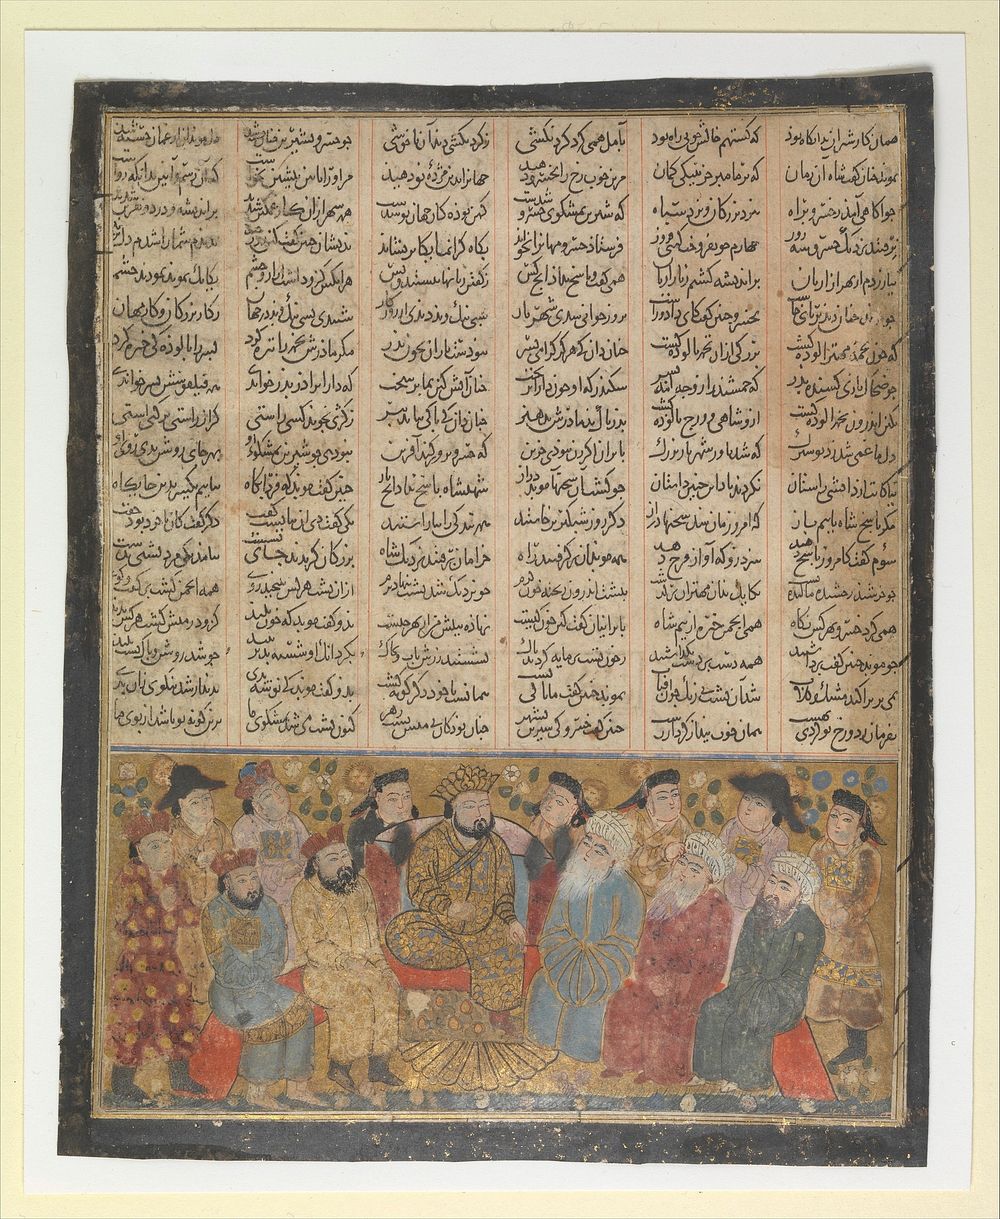 "The Nobles and Mubids Advise Khusrau Parviz about Shirin", Folio from the First Small Shahnama (Book of Kings)